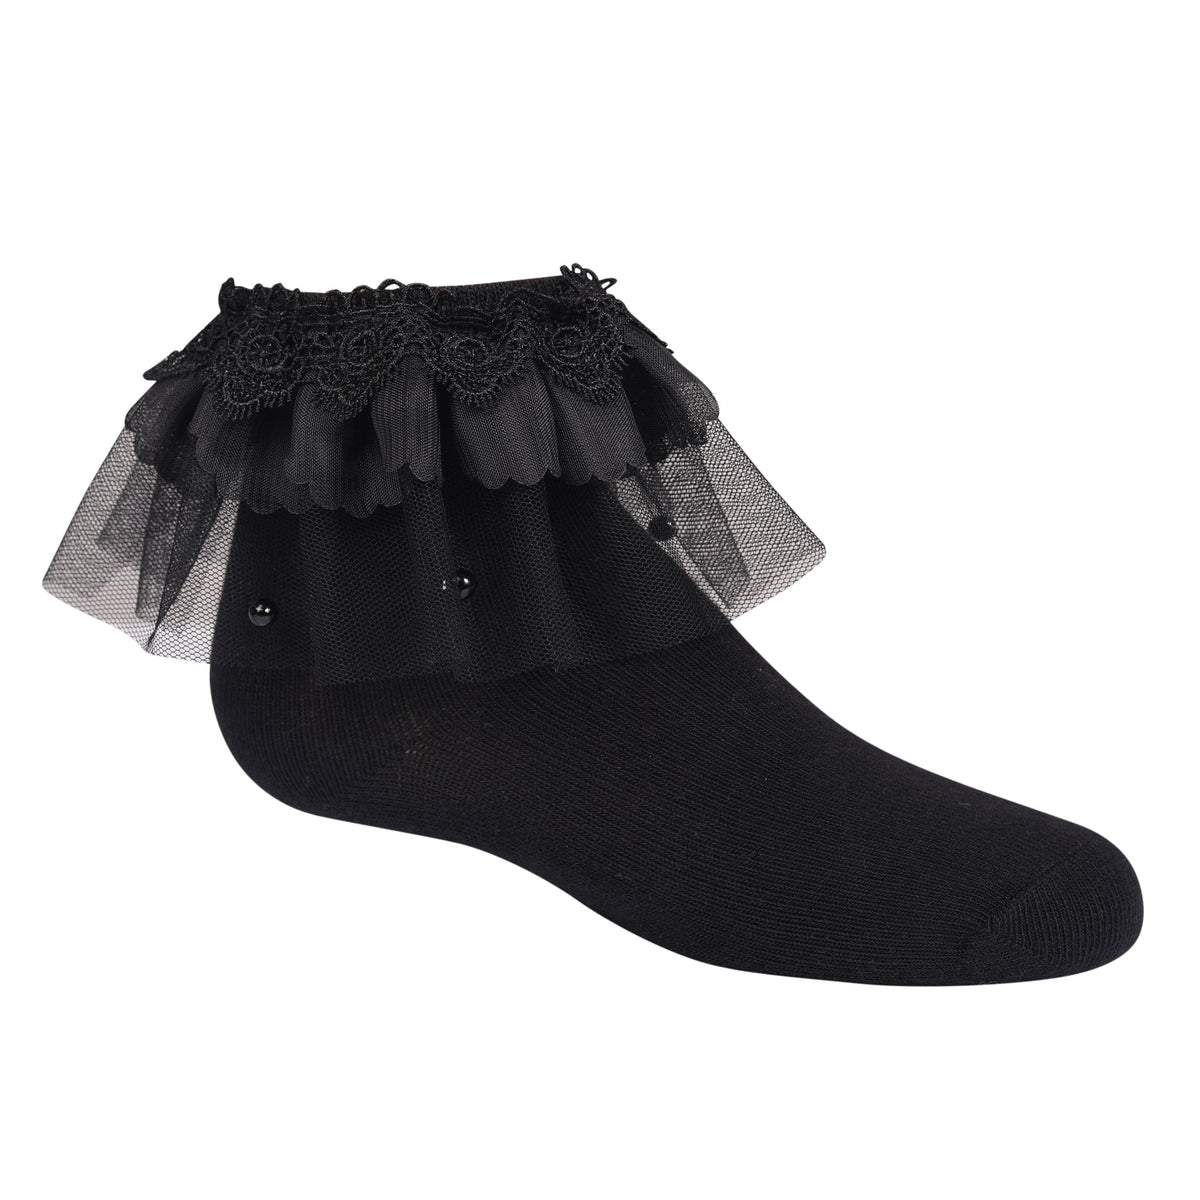 Off White Lace Trim] Ruffle Ankle Socks – The Spotted Phoenix, LLC